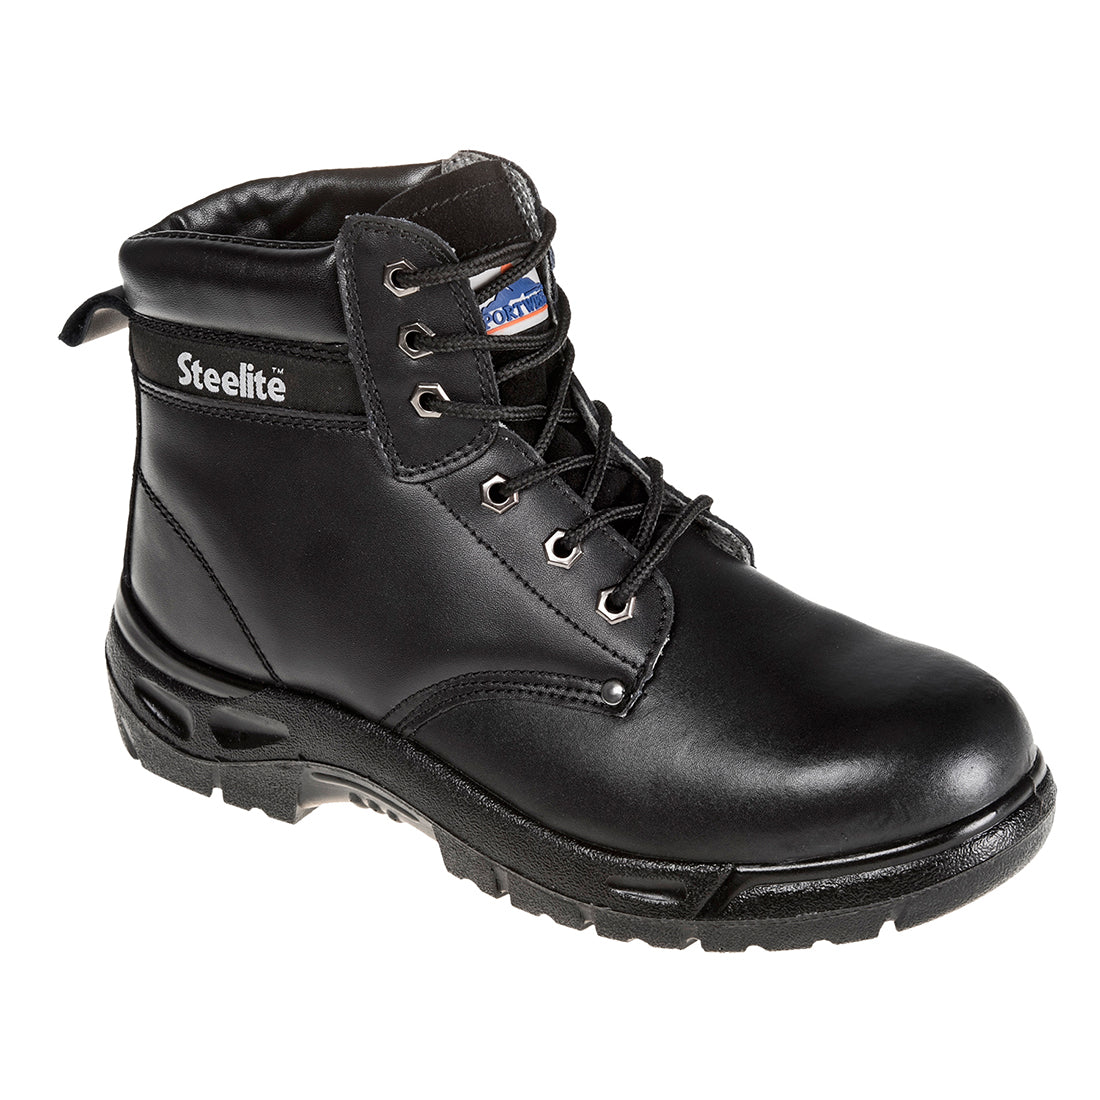 PORTWEST SIZE 5 / 38 FW03 Black Steelite Boot S3 Steel toe safety boot rigger